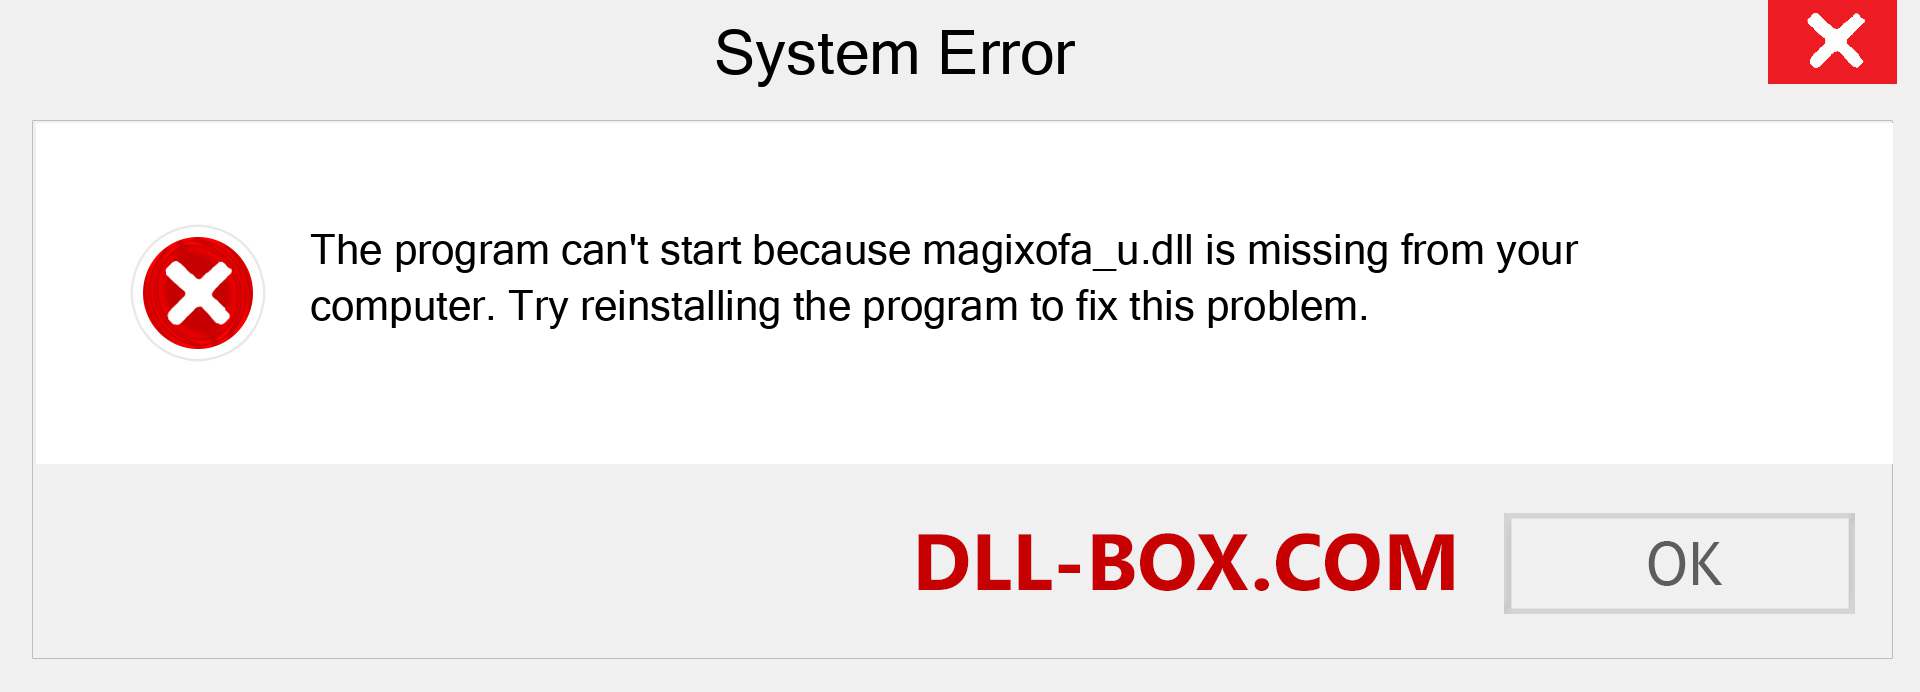  magixofa_u.dll file is missing?. Download for Windows 7, 8, 10 - Fix  magixofa_u dll Missing Error on Windows, photos, images